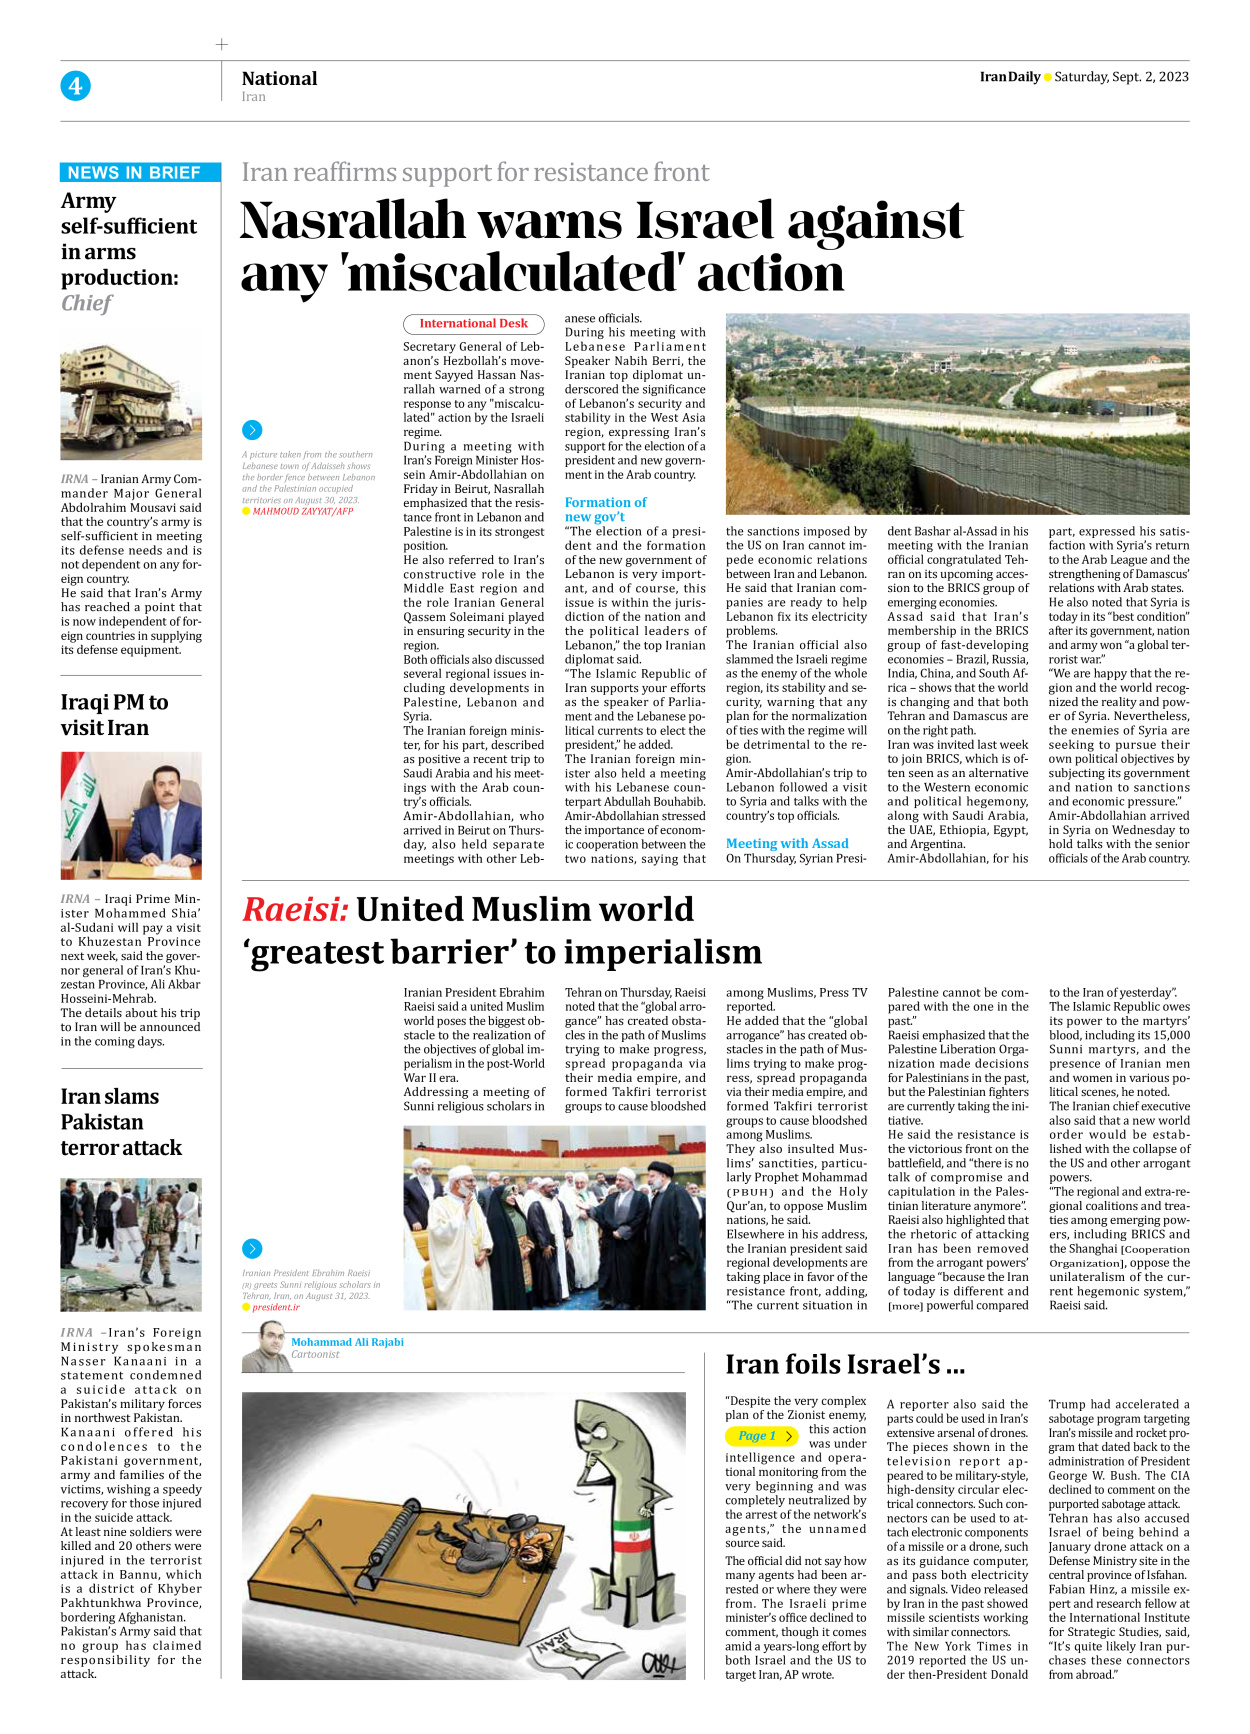 Iran Daily - Number Seven Thousand Three Hundred and Seventy Eight - 02 September 2023 - Page 4